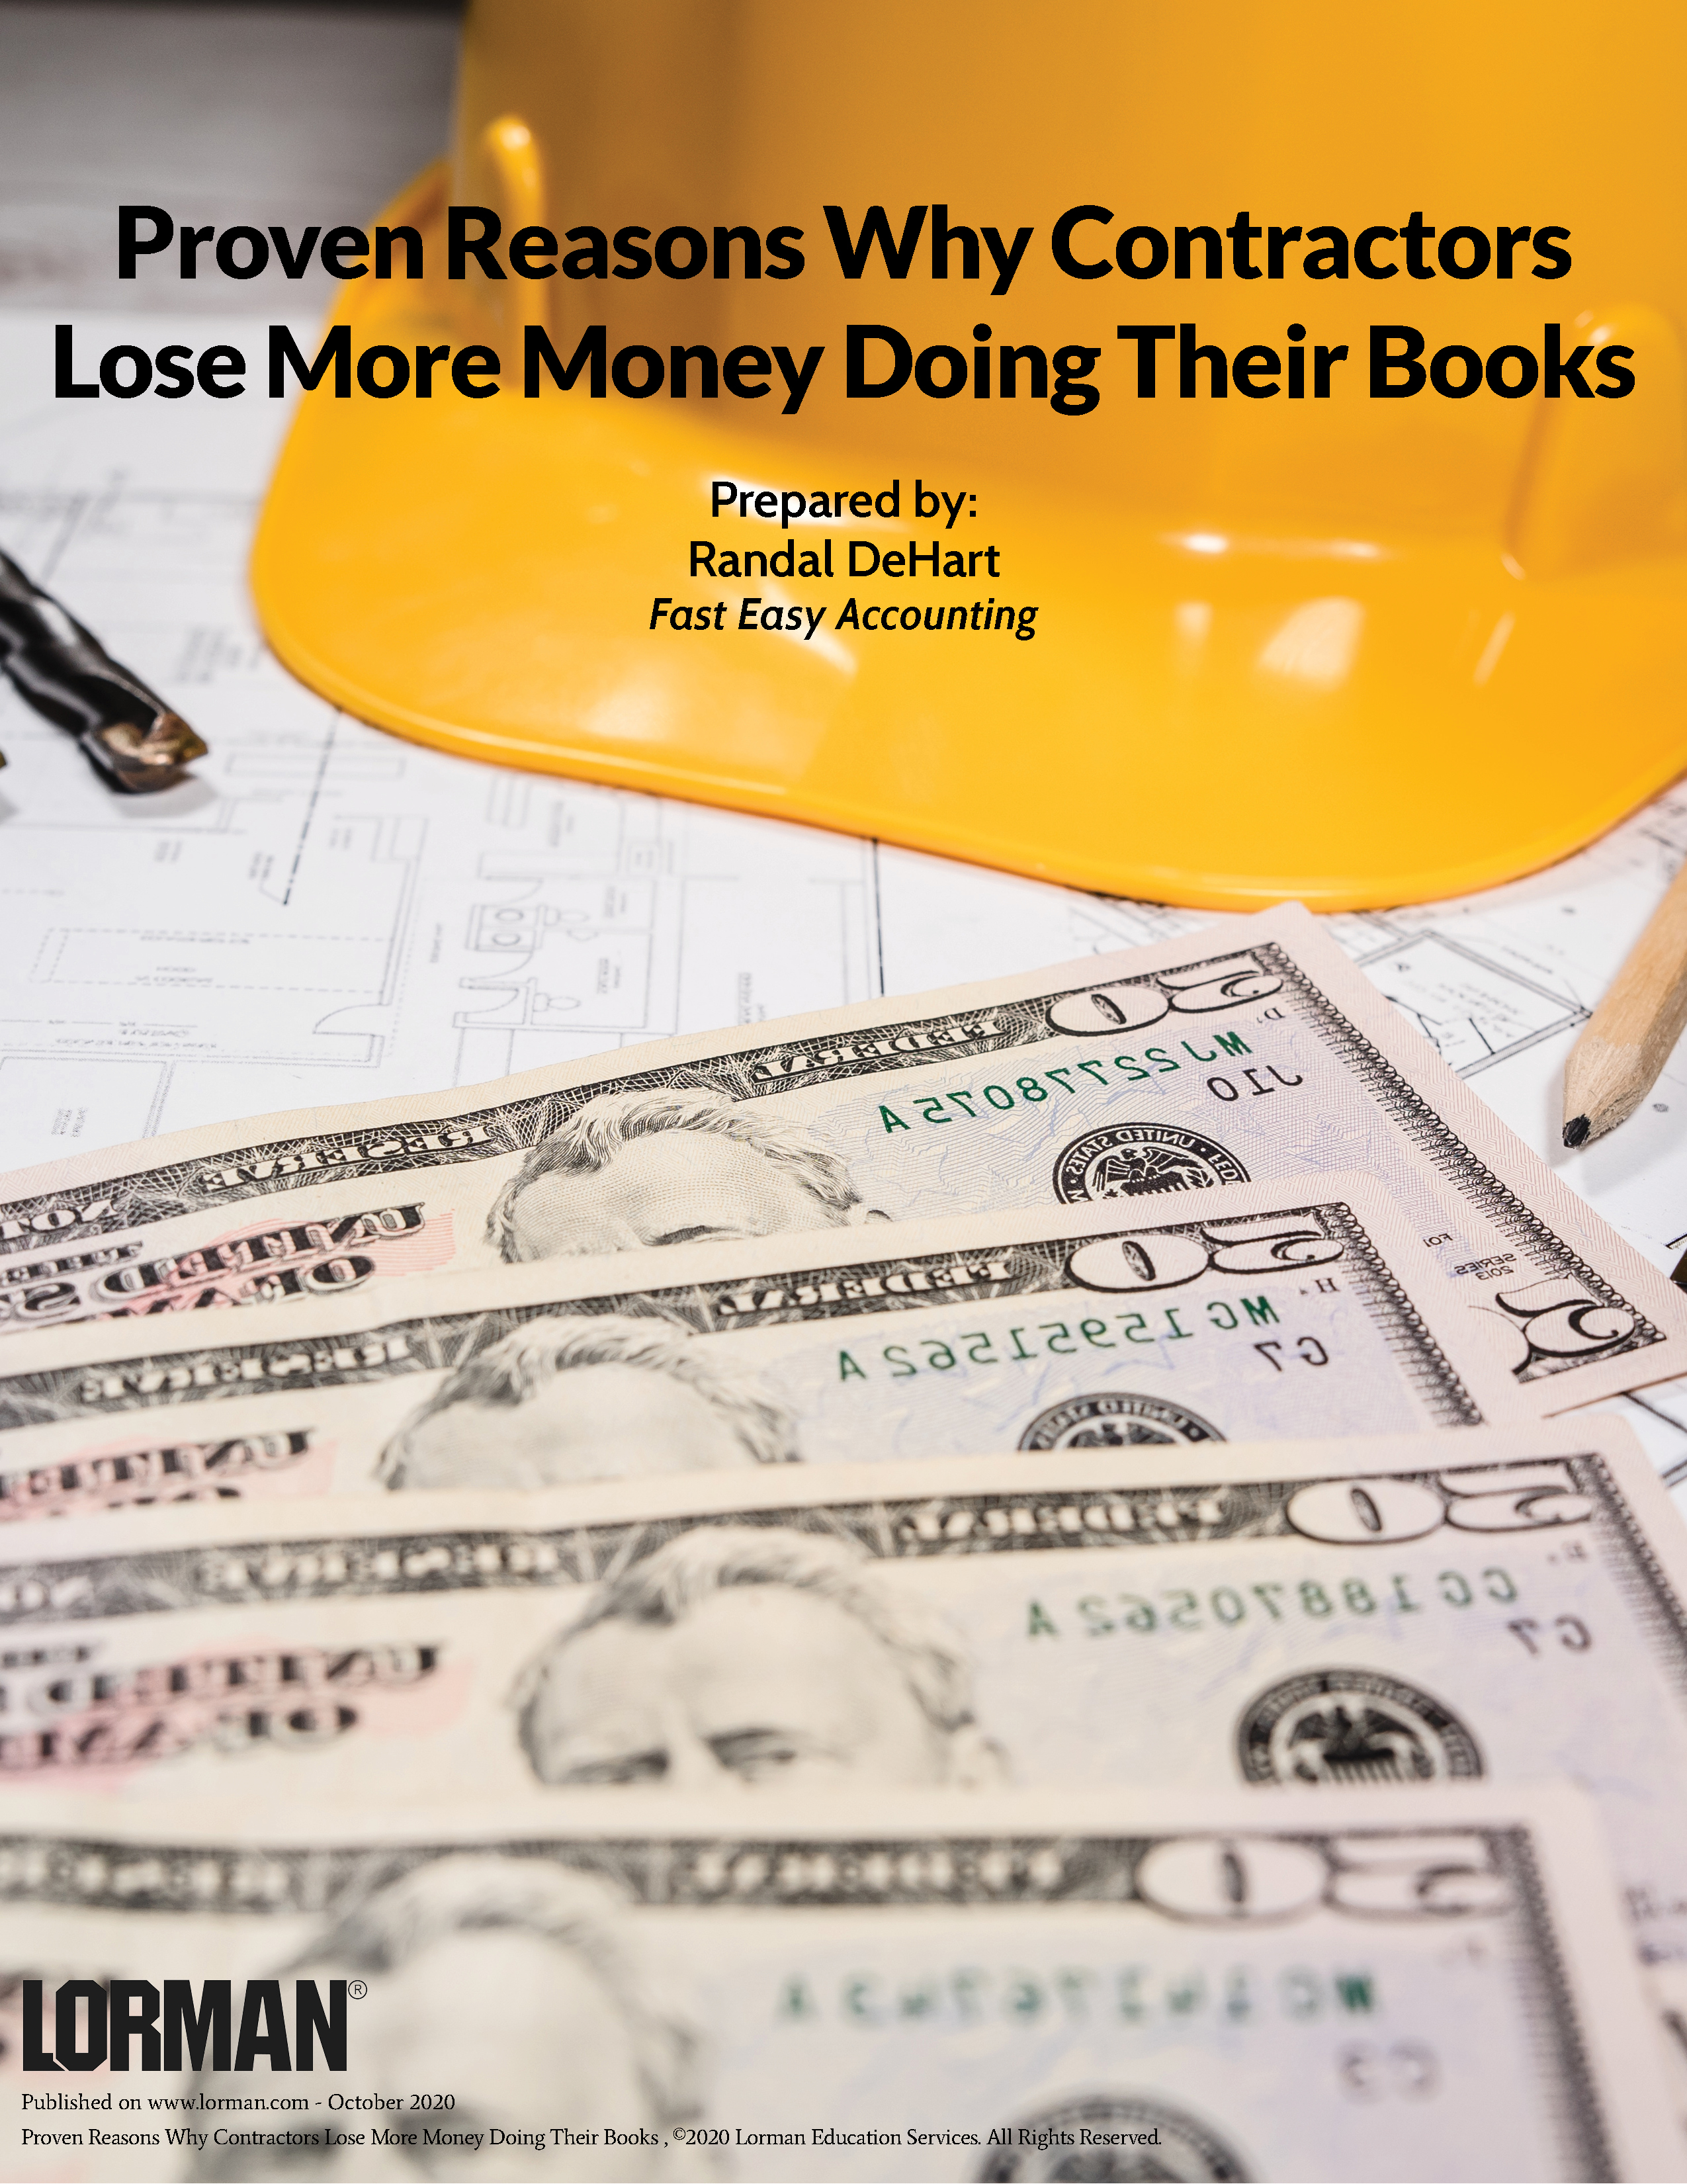 Proven Reasons Why Contractors Lose More Money Doing Their Books